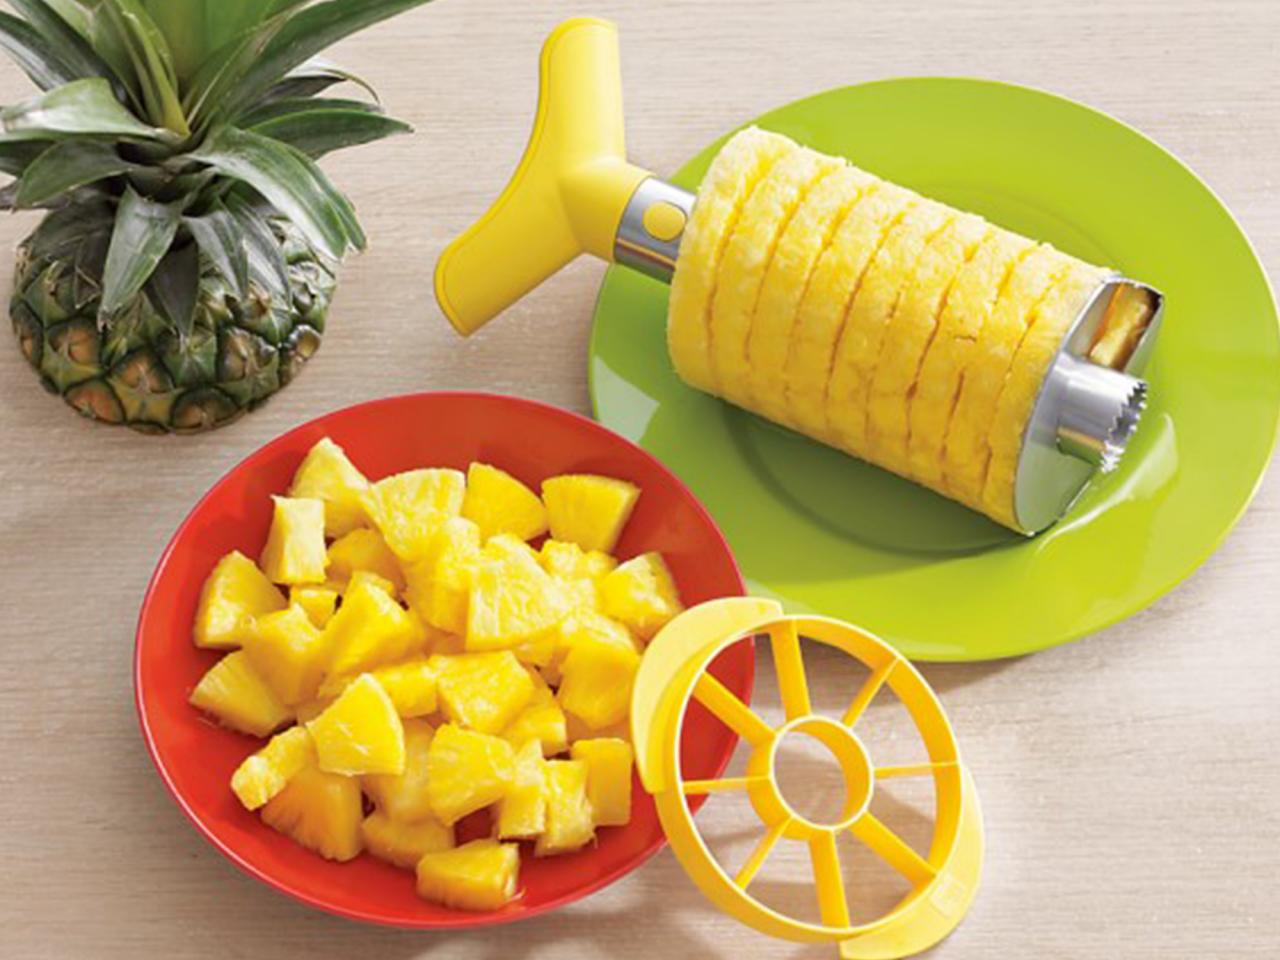 https://food.fnr.sndimg.com/content/dam/images/food/products/2020/2/14/rx_williams-sonoma-pineapple-slice-dice.jpg.rend.hgtvcom.1280.960.suffix/1581702600954.jpeg